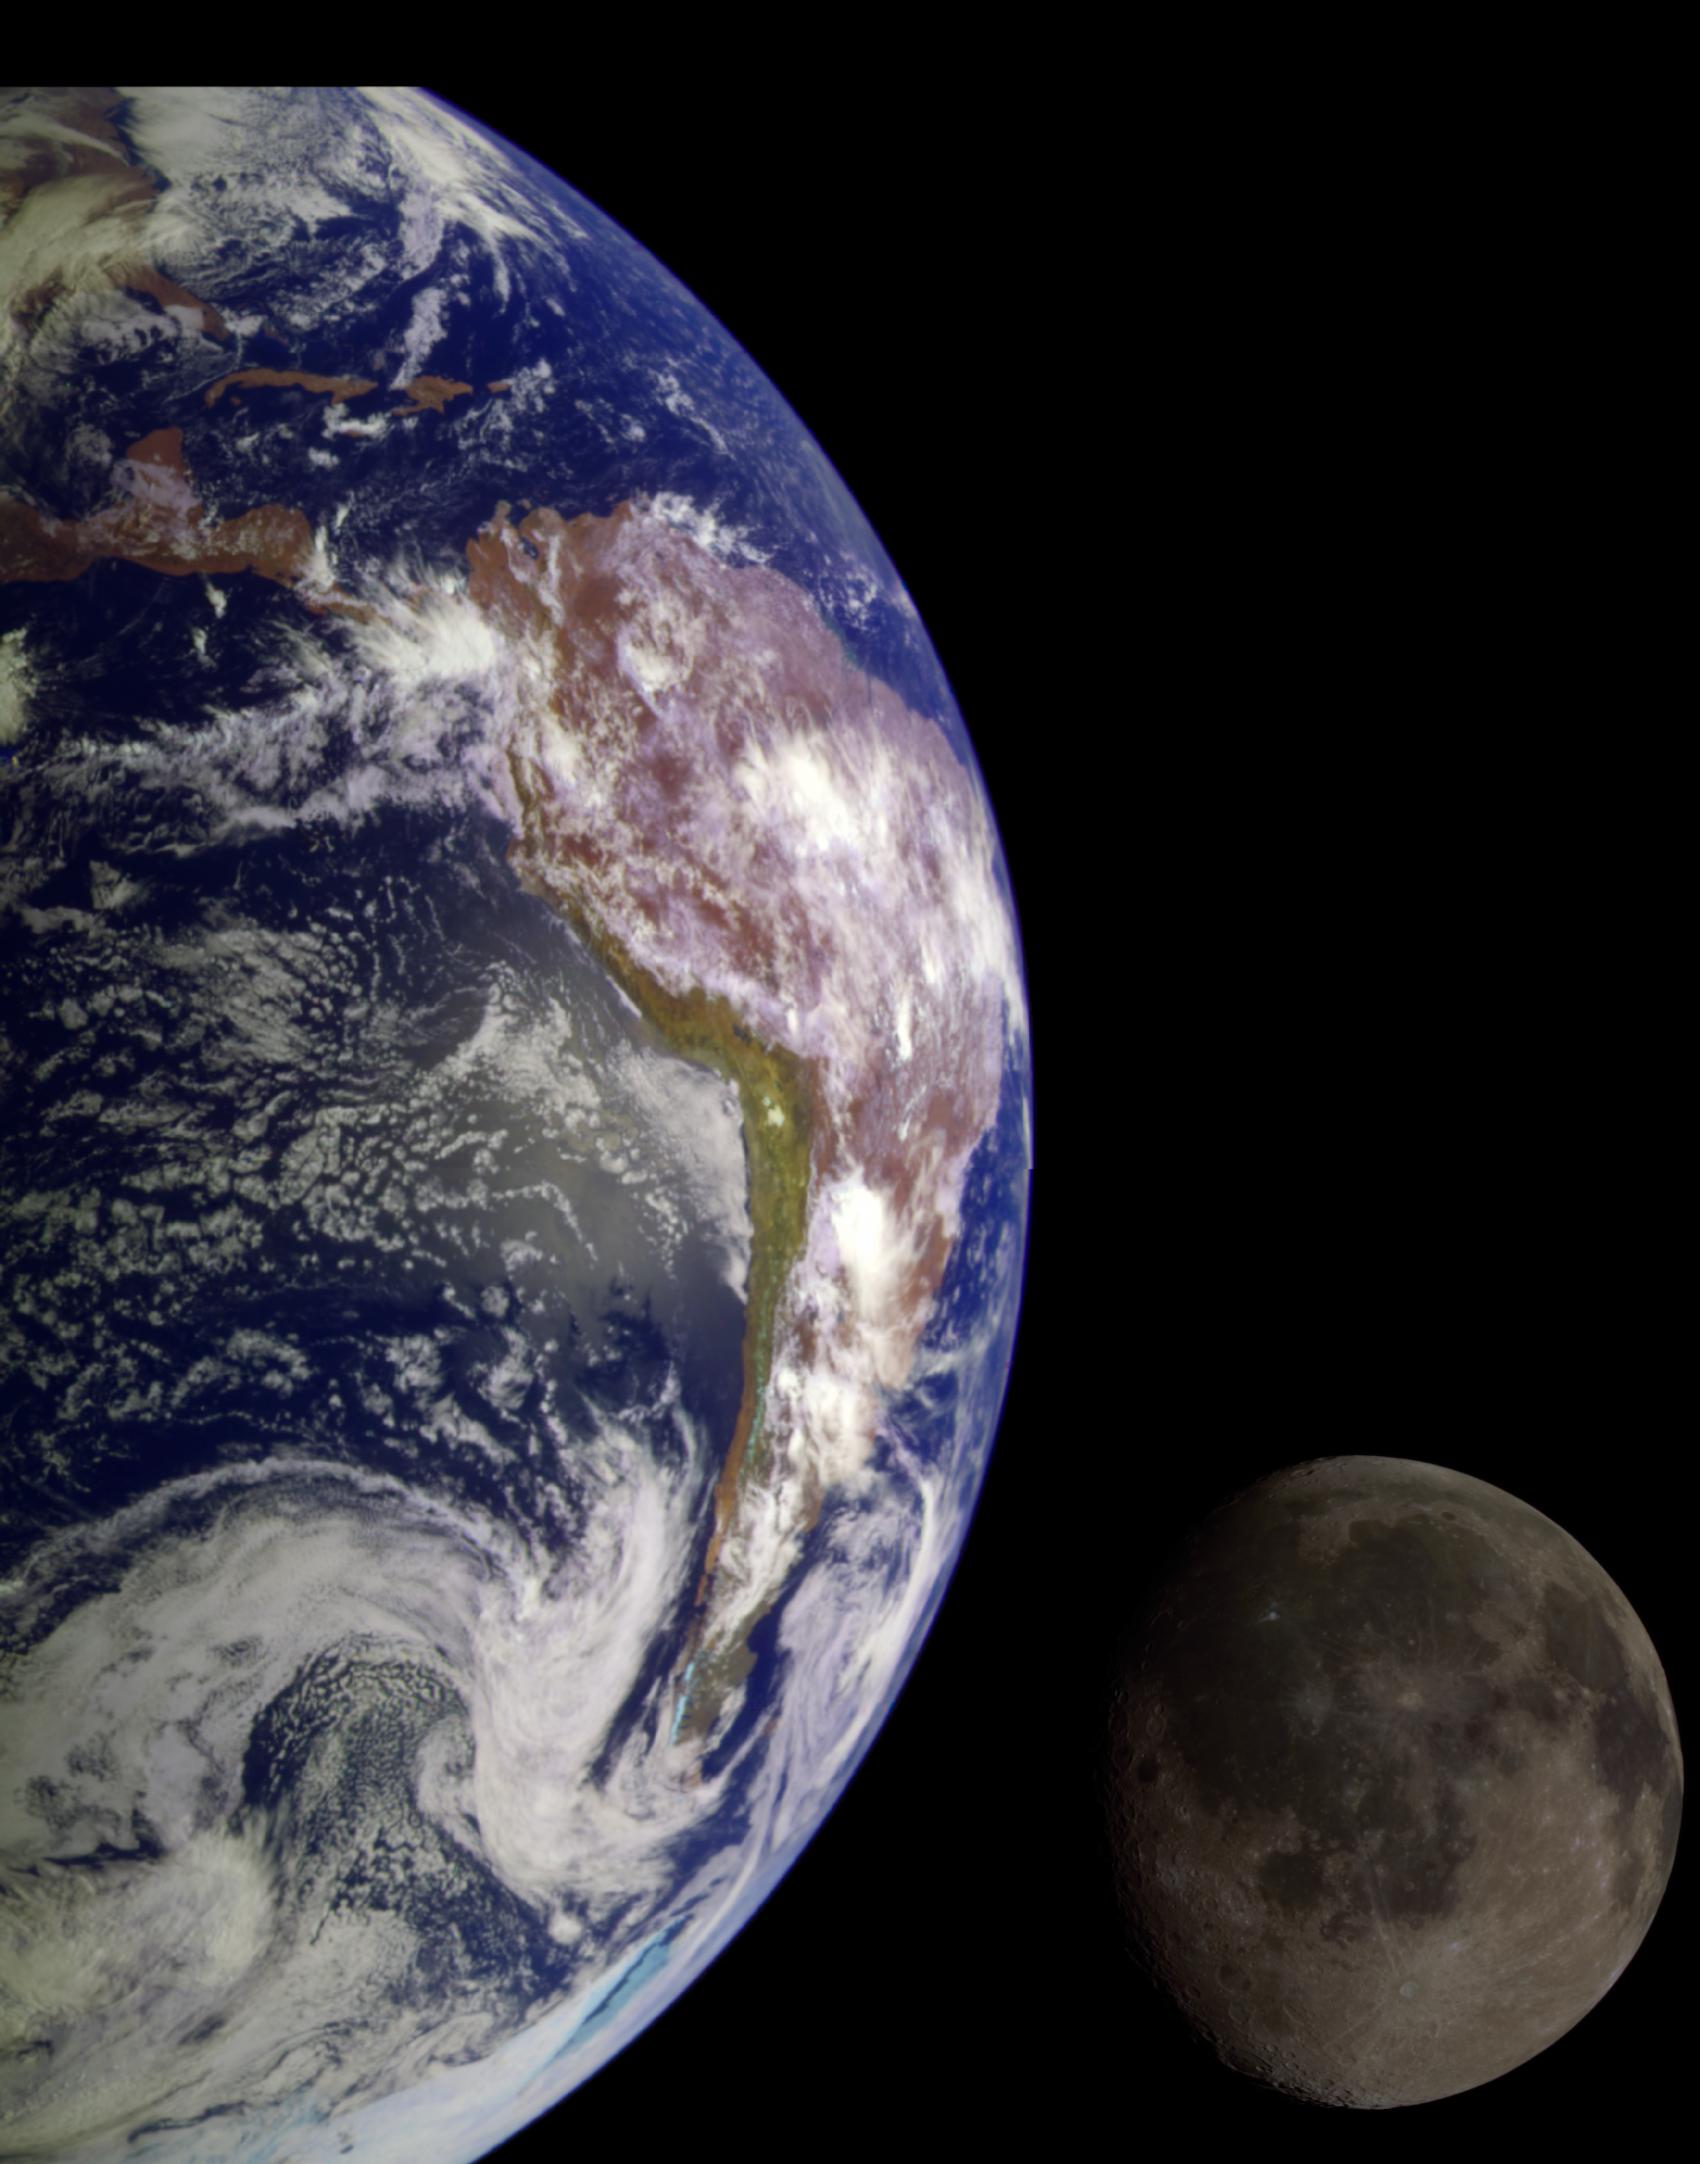 large Earth with moon in the background